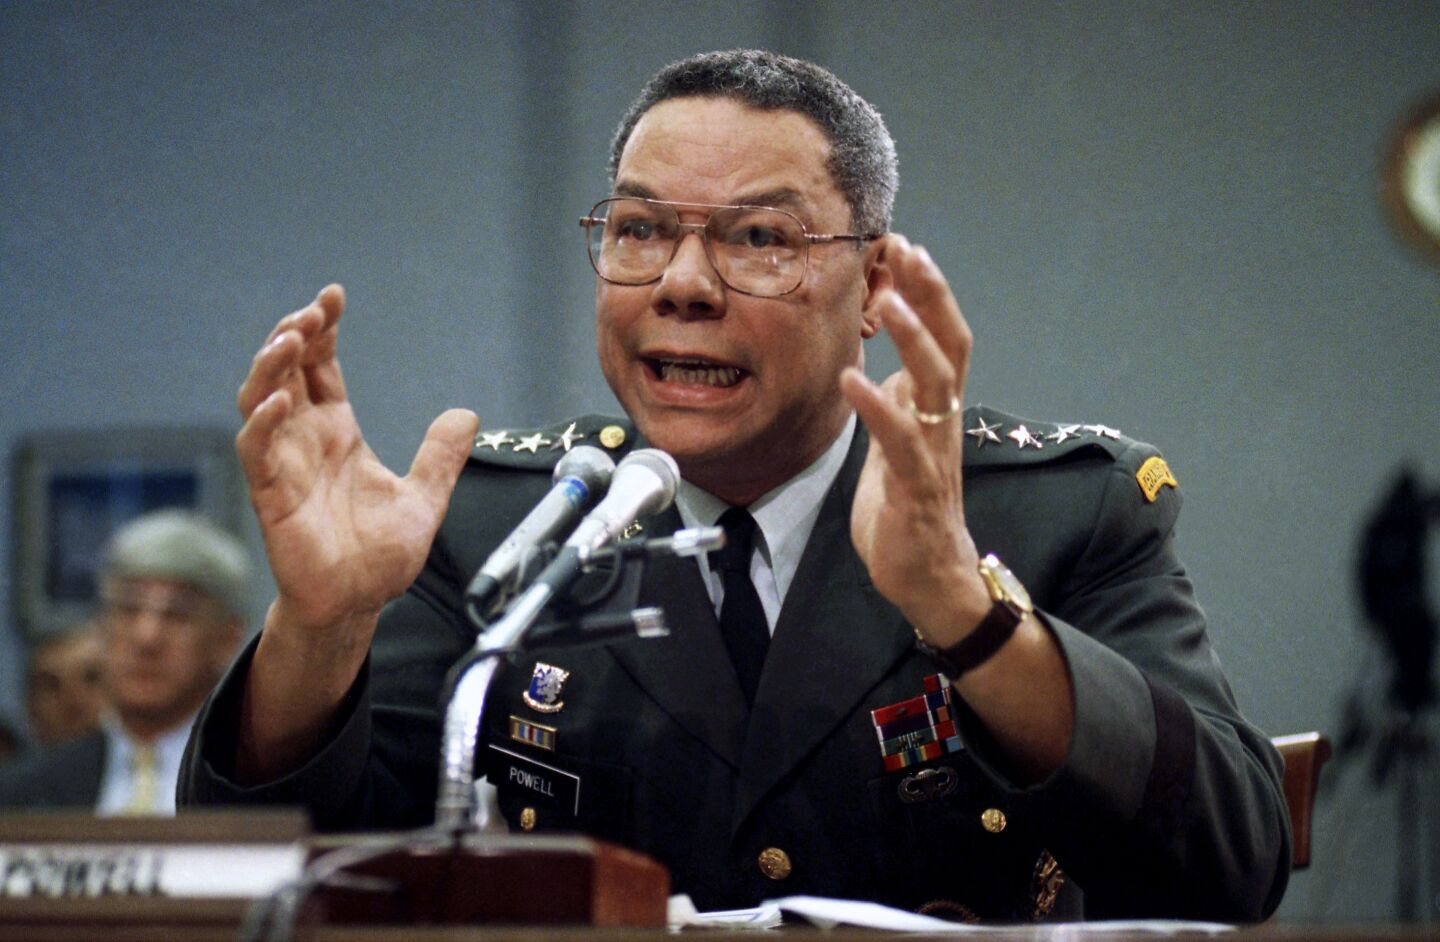 Gen. Colin Powell speaks in front of a microphone at a table on Capitol Hill in Washington